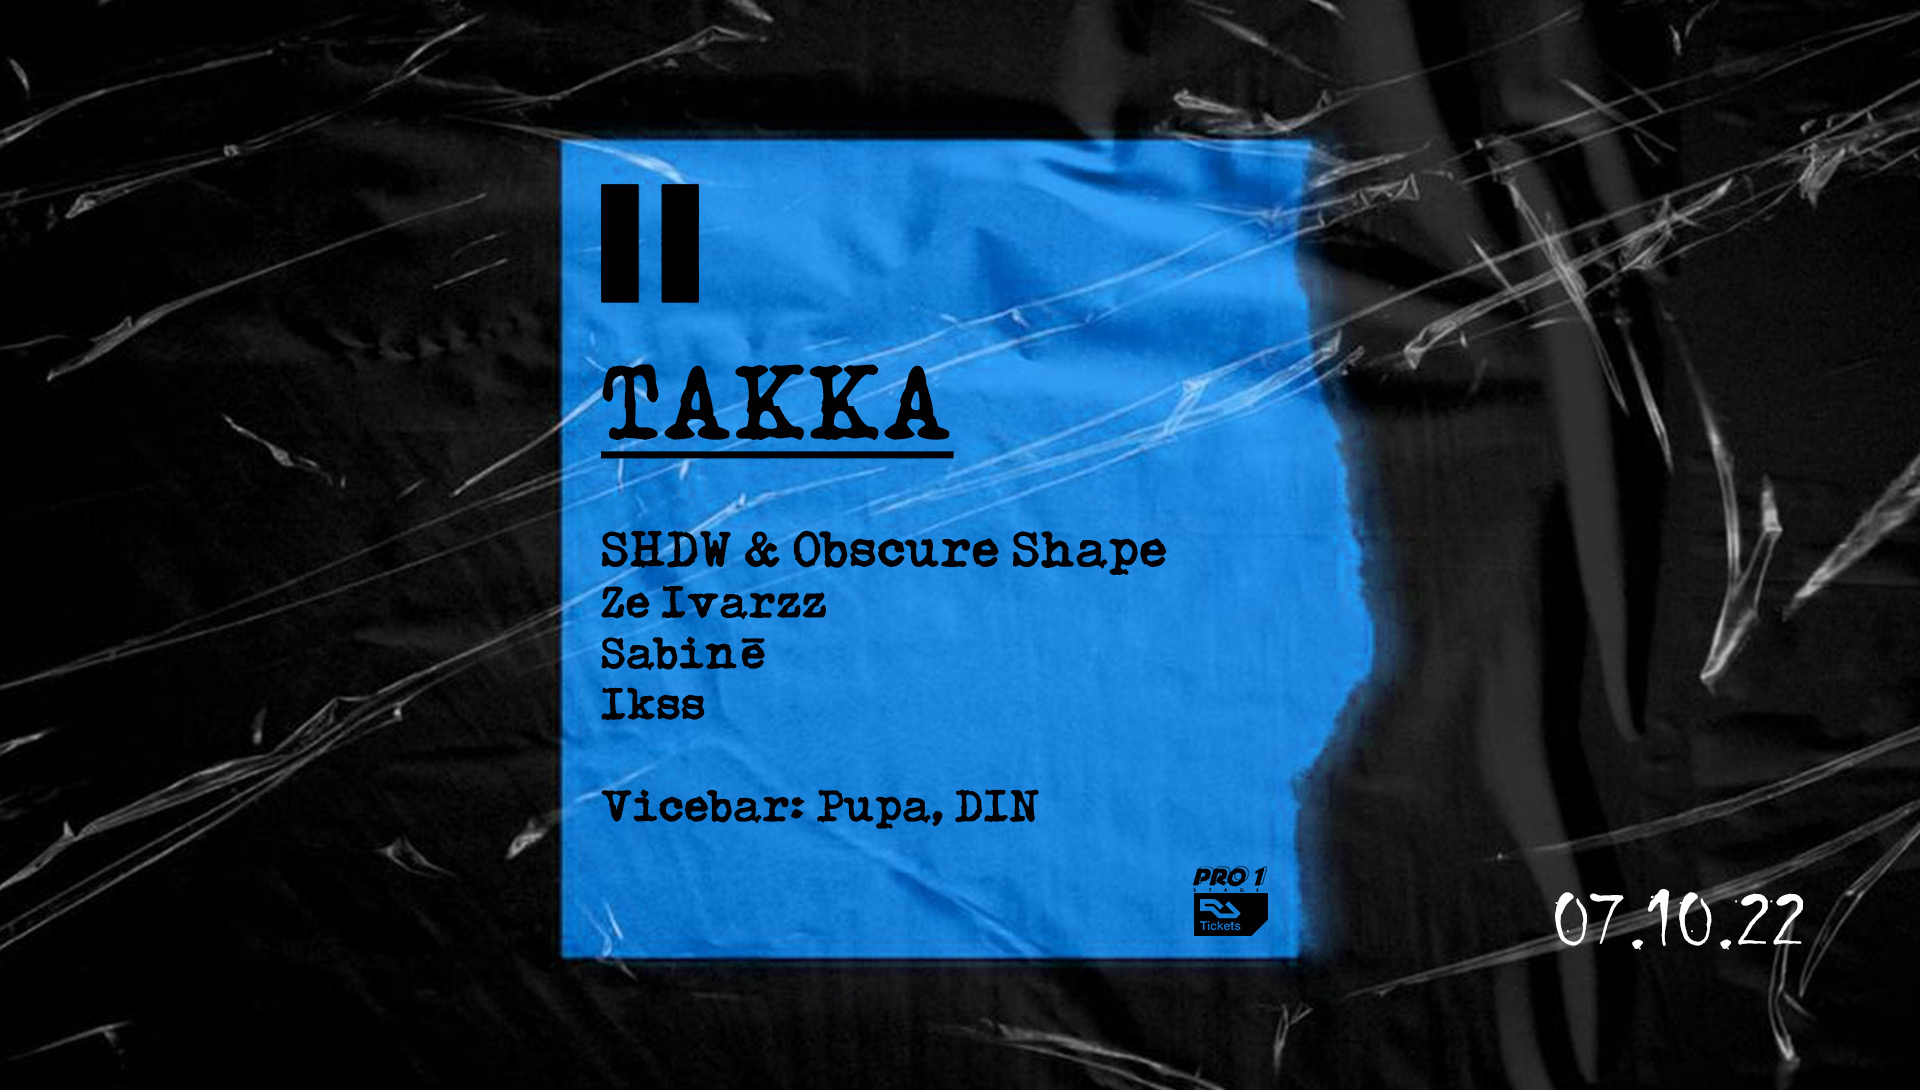 Takka with SHDW & Obscure Shape - Flyer front